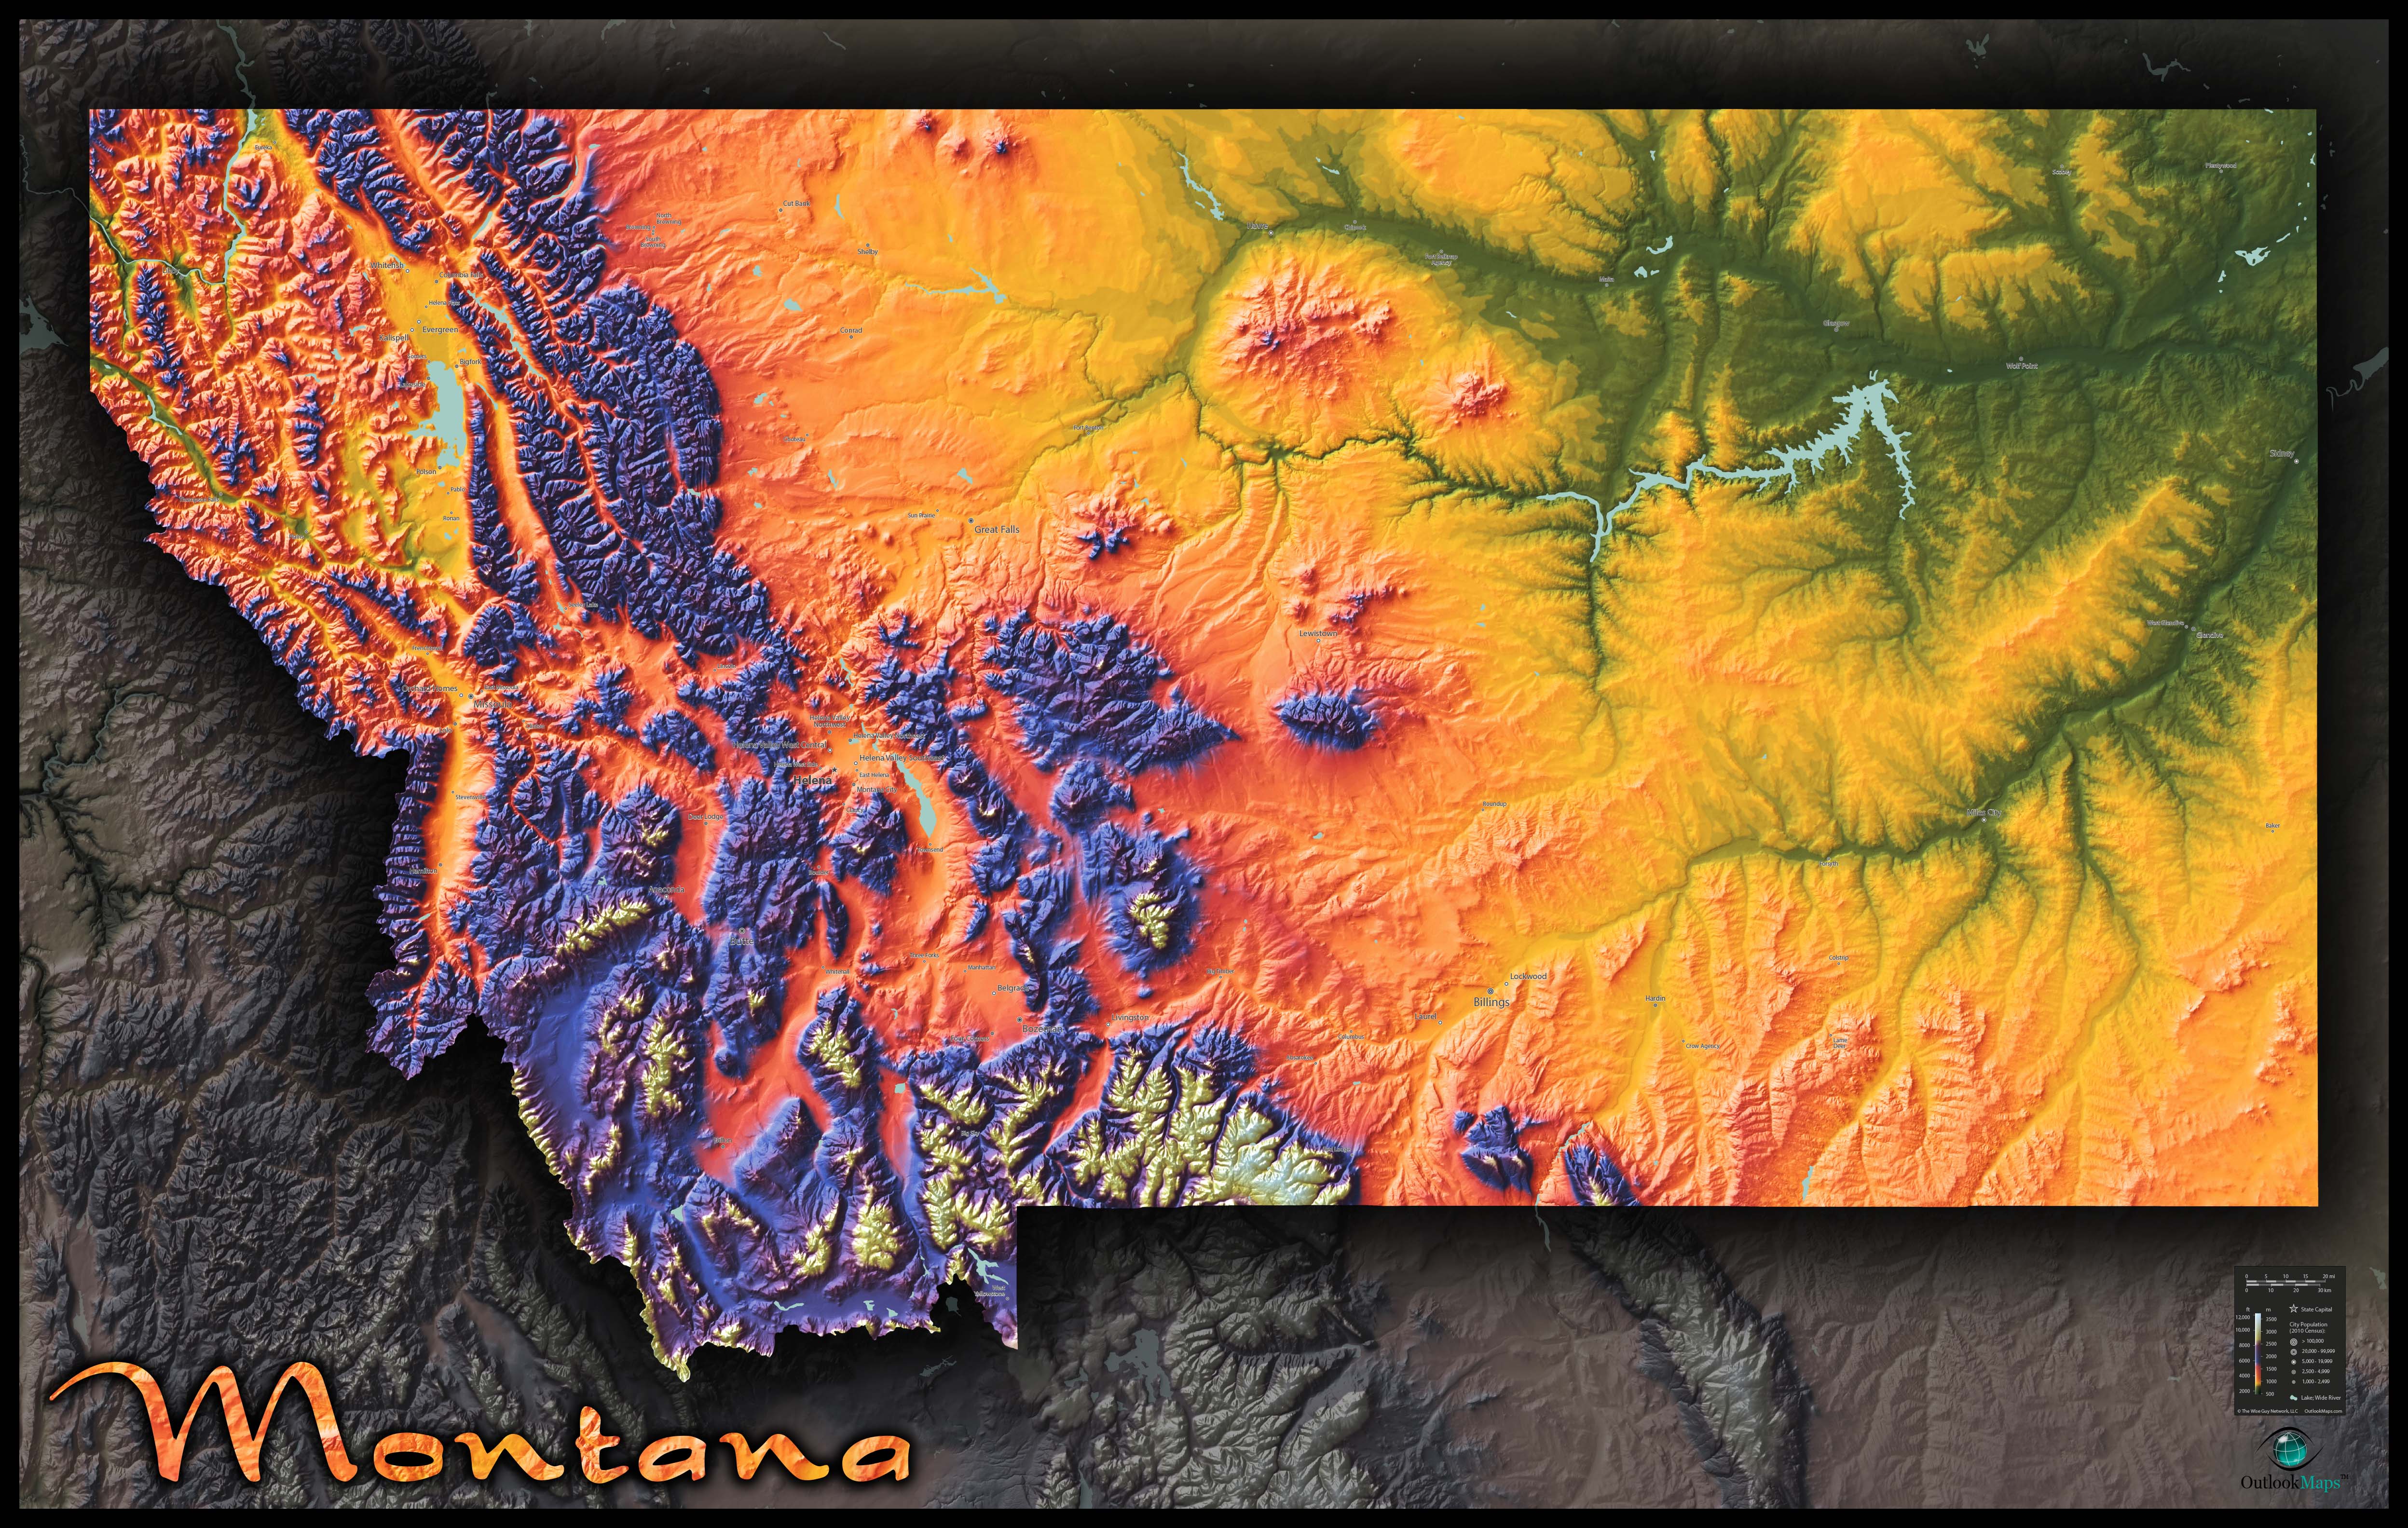 Montana Topo Wall Map By Outlook Maps Mapsales 7886